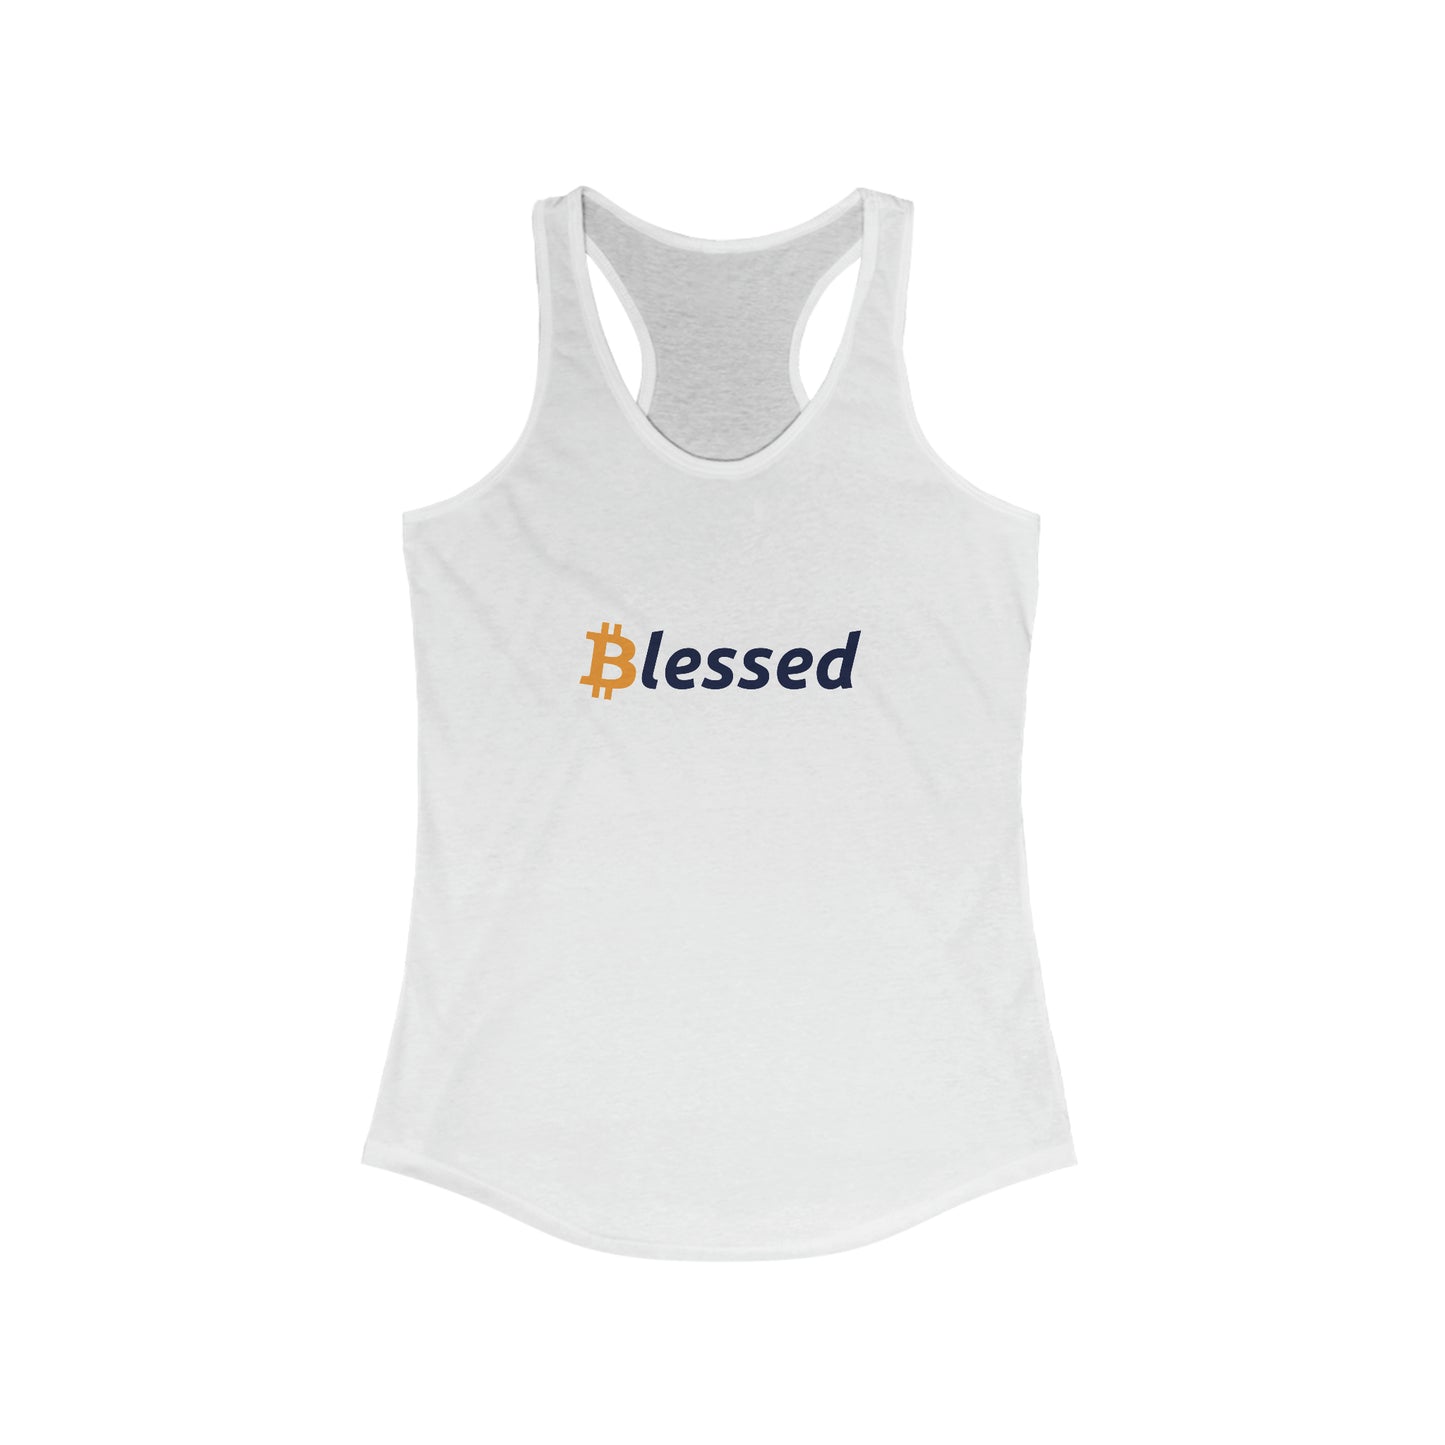 Blessed by Bitcoin - Women's Racerback Tank